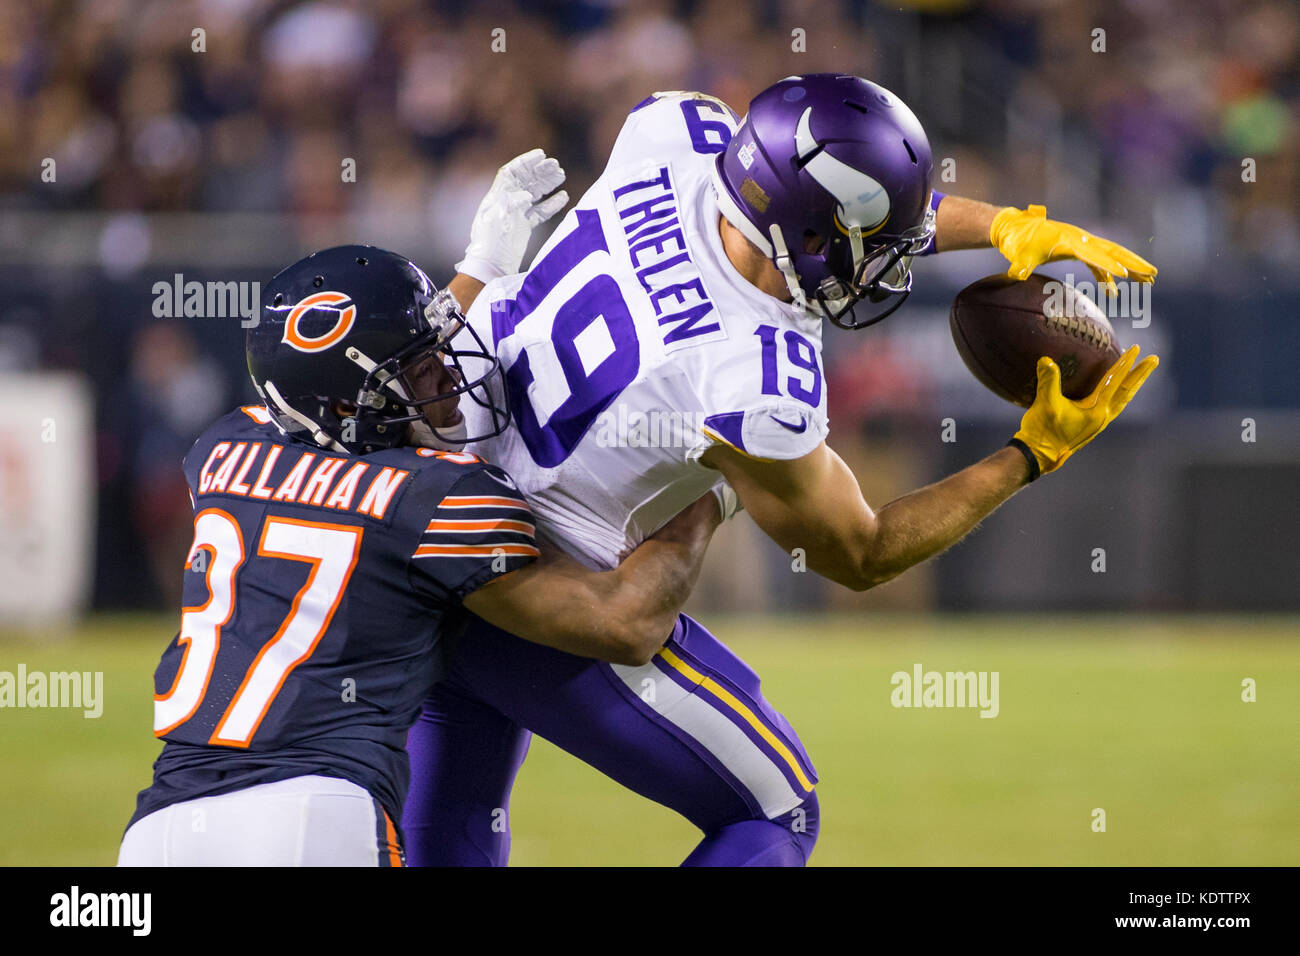 Chicago, Illinois, USA. 09th Oct, 2017. - Bears #37 Bryce Callahan and Vikings #19 Adam Thielen in action during the NFL Game between the Minnesota Vikings and Chicago Bears at Soldier Field in Chicago, IL. Photographer: Mike Wulf Credit: csm/Alamy Live News Stock Photo